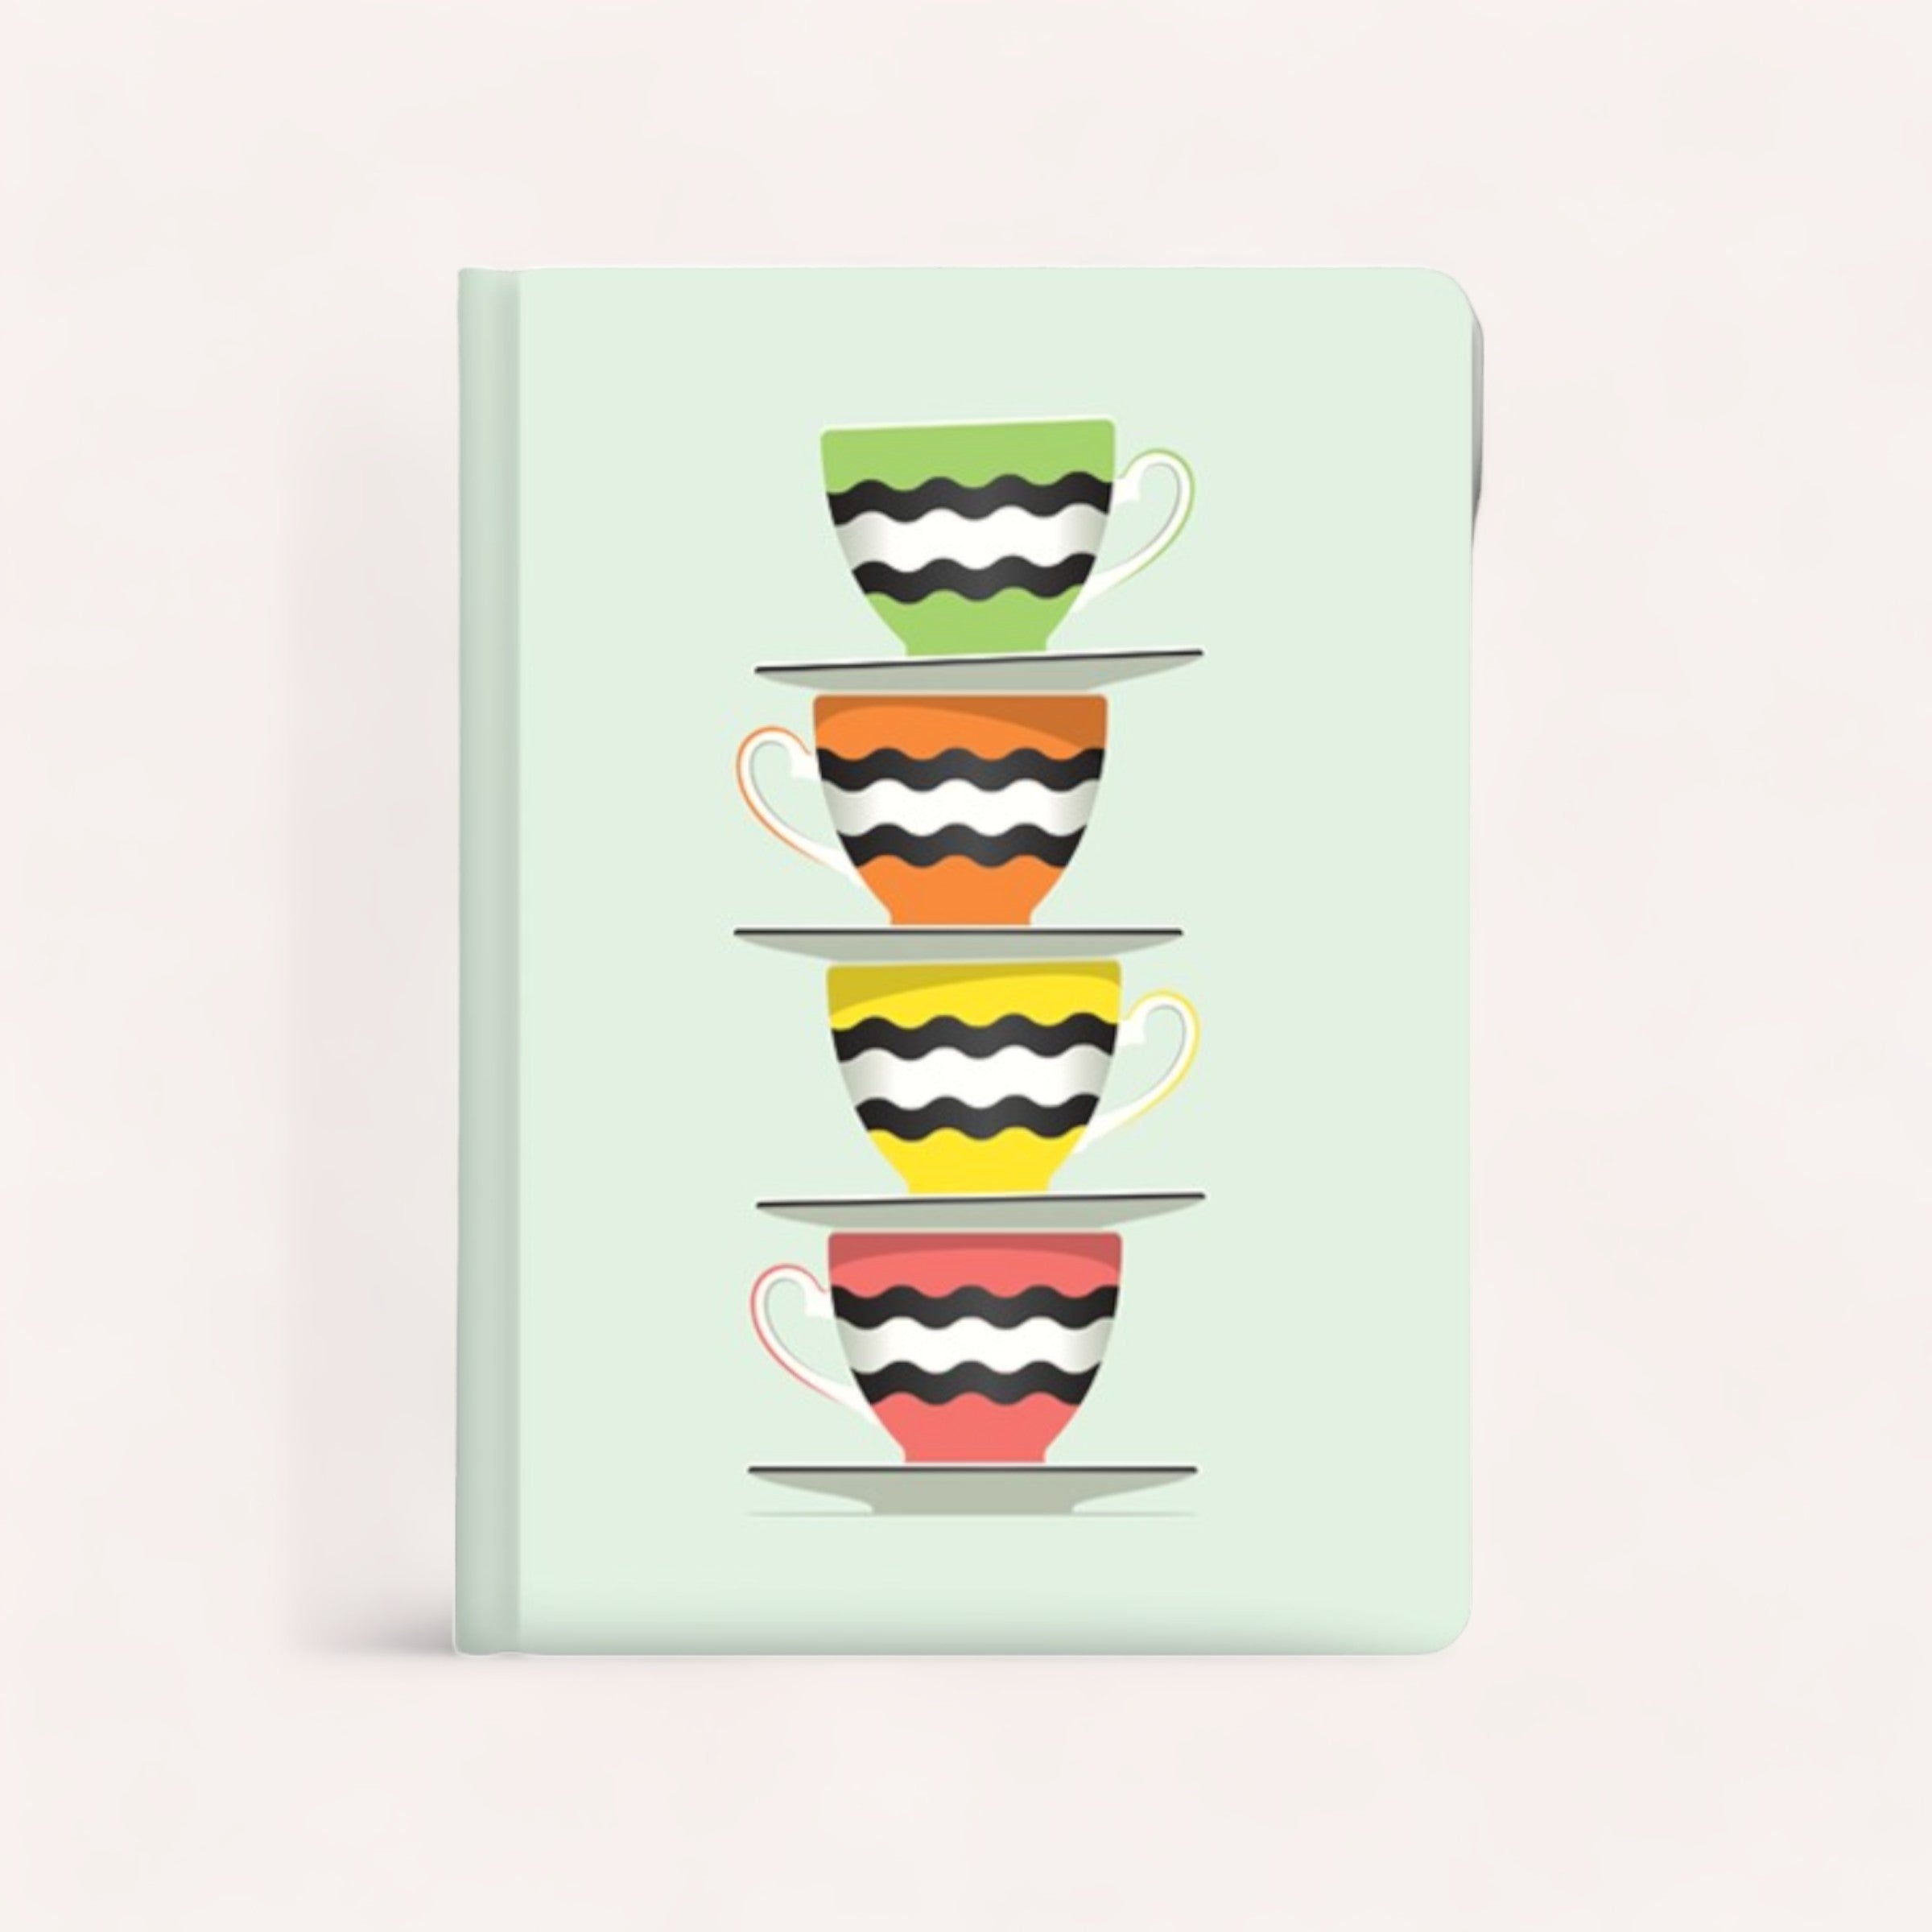 A stack of four colorful, striped teacups depicted on the pastel green cover of a Licorice Journal by Glenn Jones Accessories.